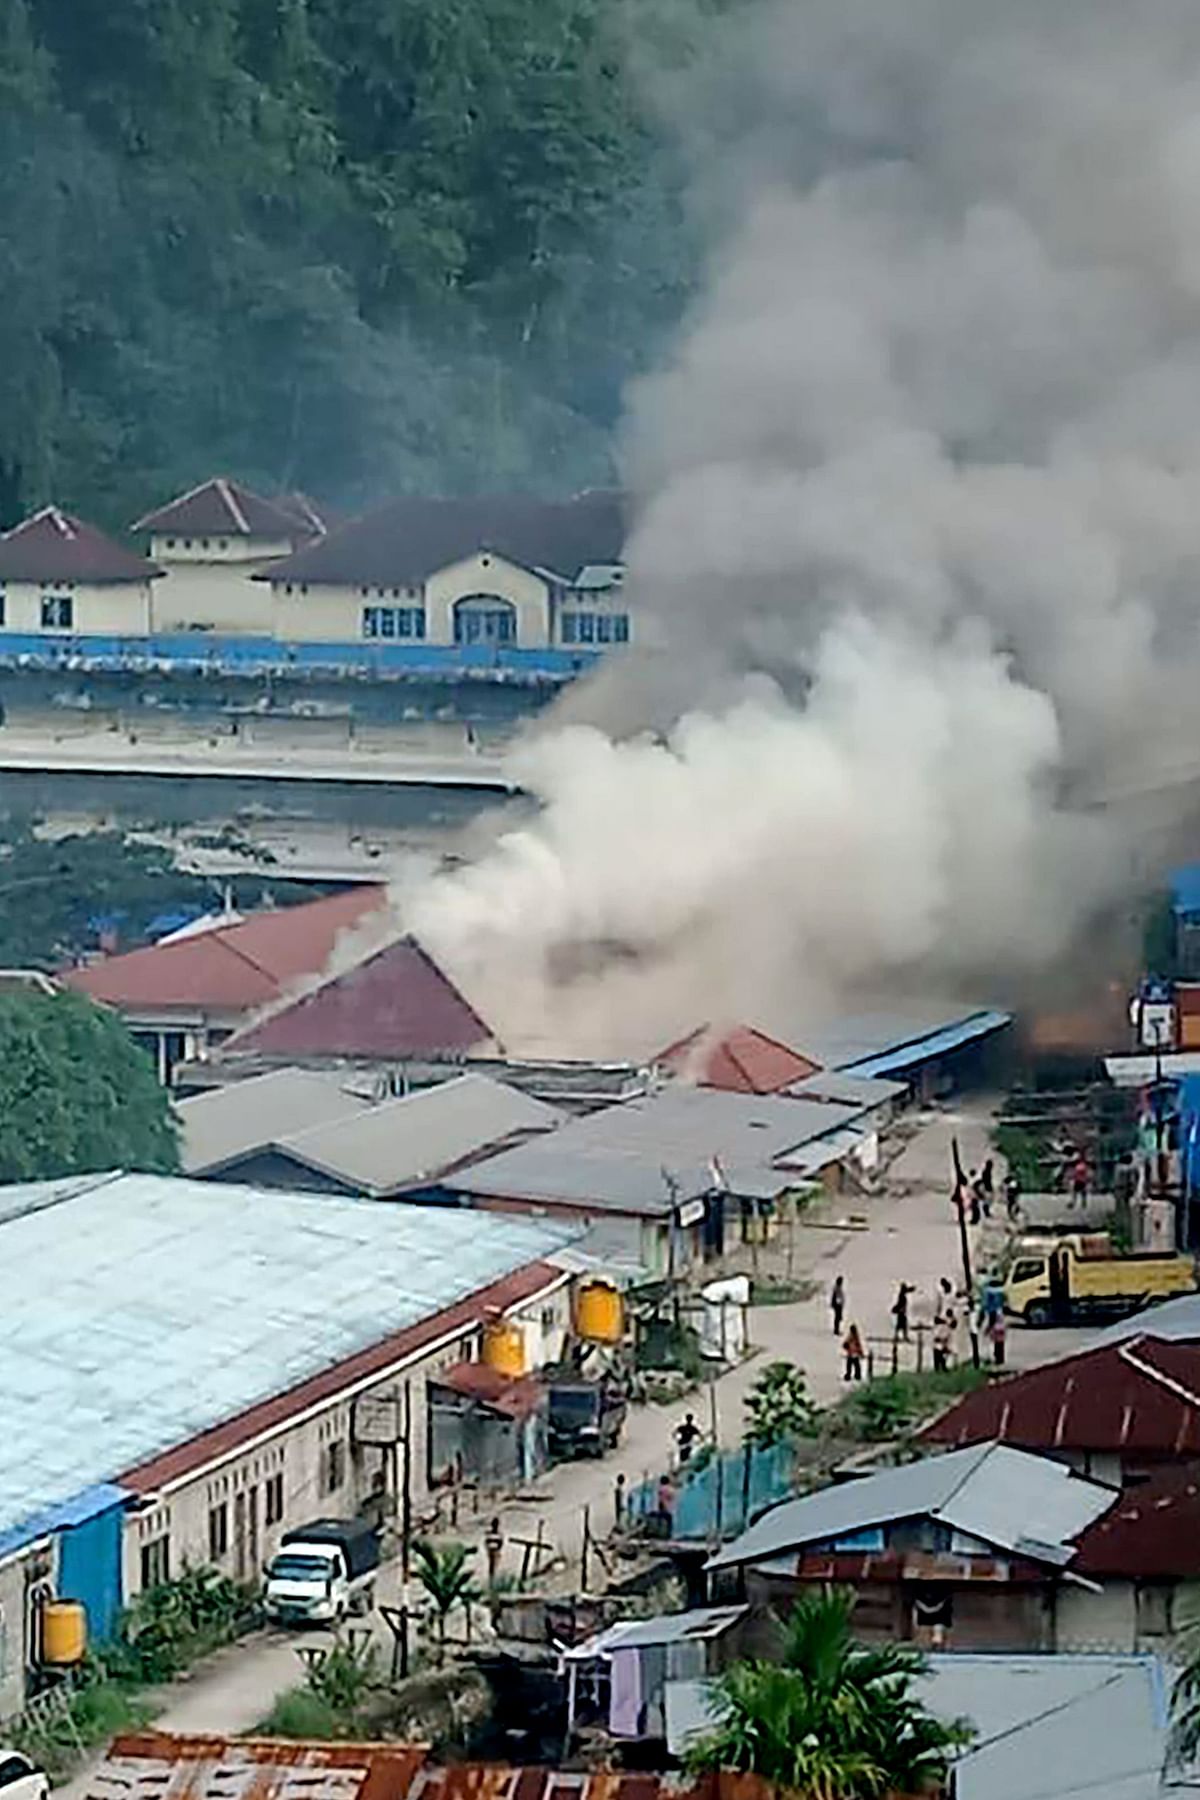 A building burns as protesters take to the streets in the city of Fakfak, Papua province, Indonesia on 21 August 2019. Photo: AFP